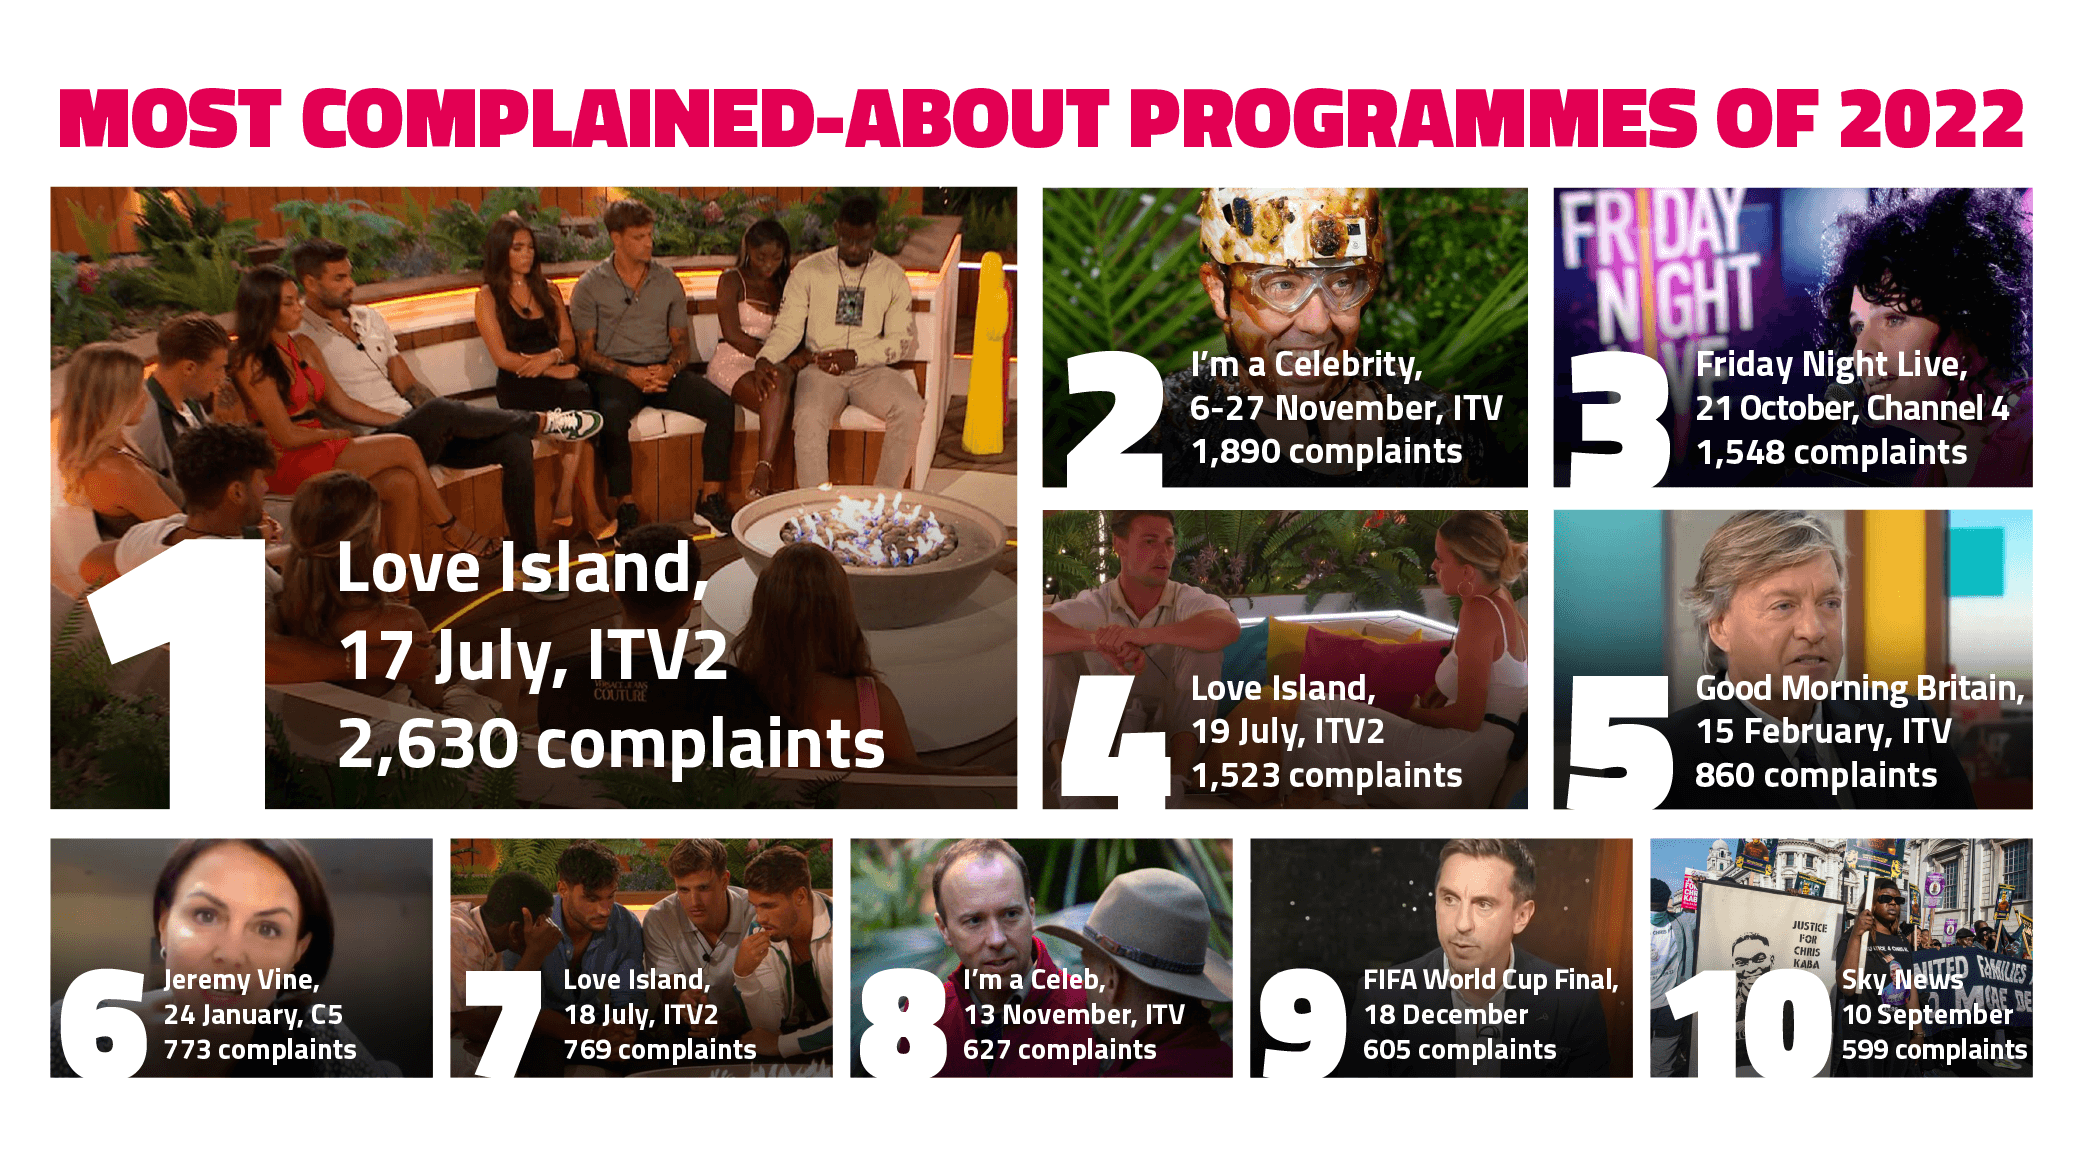 1. Love Island 2. I’m a Celebrity Get Me Out of Here! 3. Friday Night Live  4. Love Island 5. Good Morning Britain 6. Jeremy Vine 7. Love Island 8. I'm a Celebrity Get Me Out of Here! 9. FIFA World Cup Final 2022: Argentina v France 10. Sky News